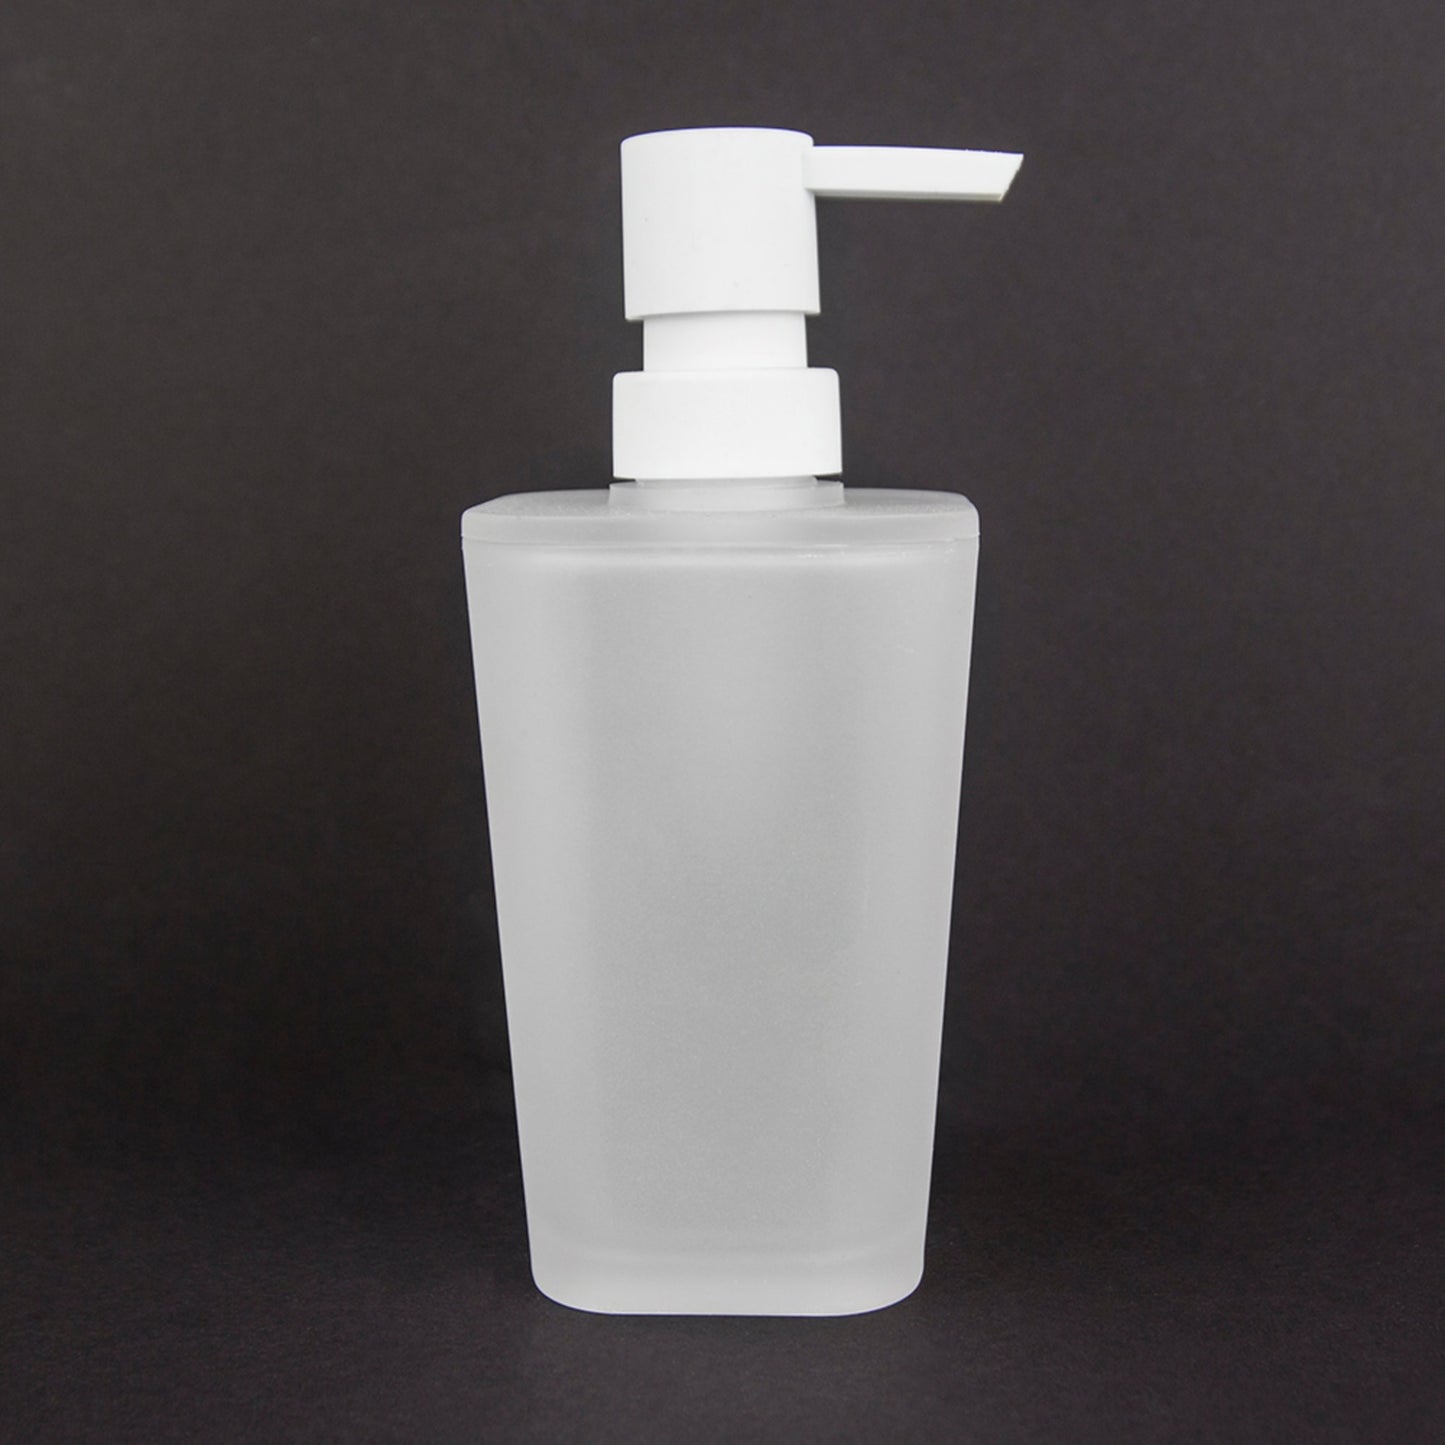 Frosted Rubberized Plastic  10 oz. Hand Soap Dispenser with Plastic Pump